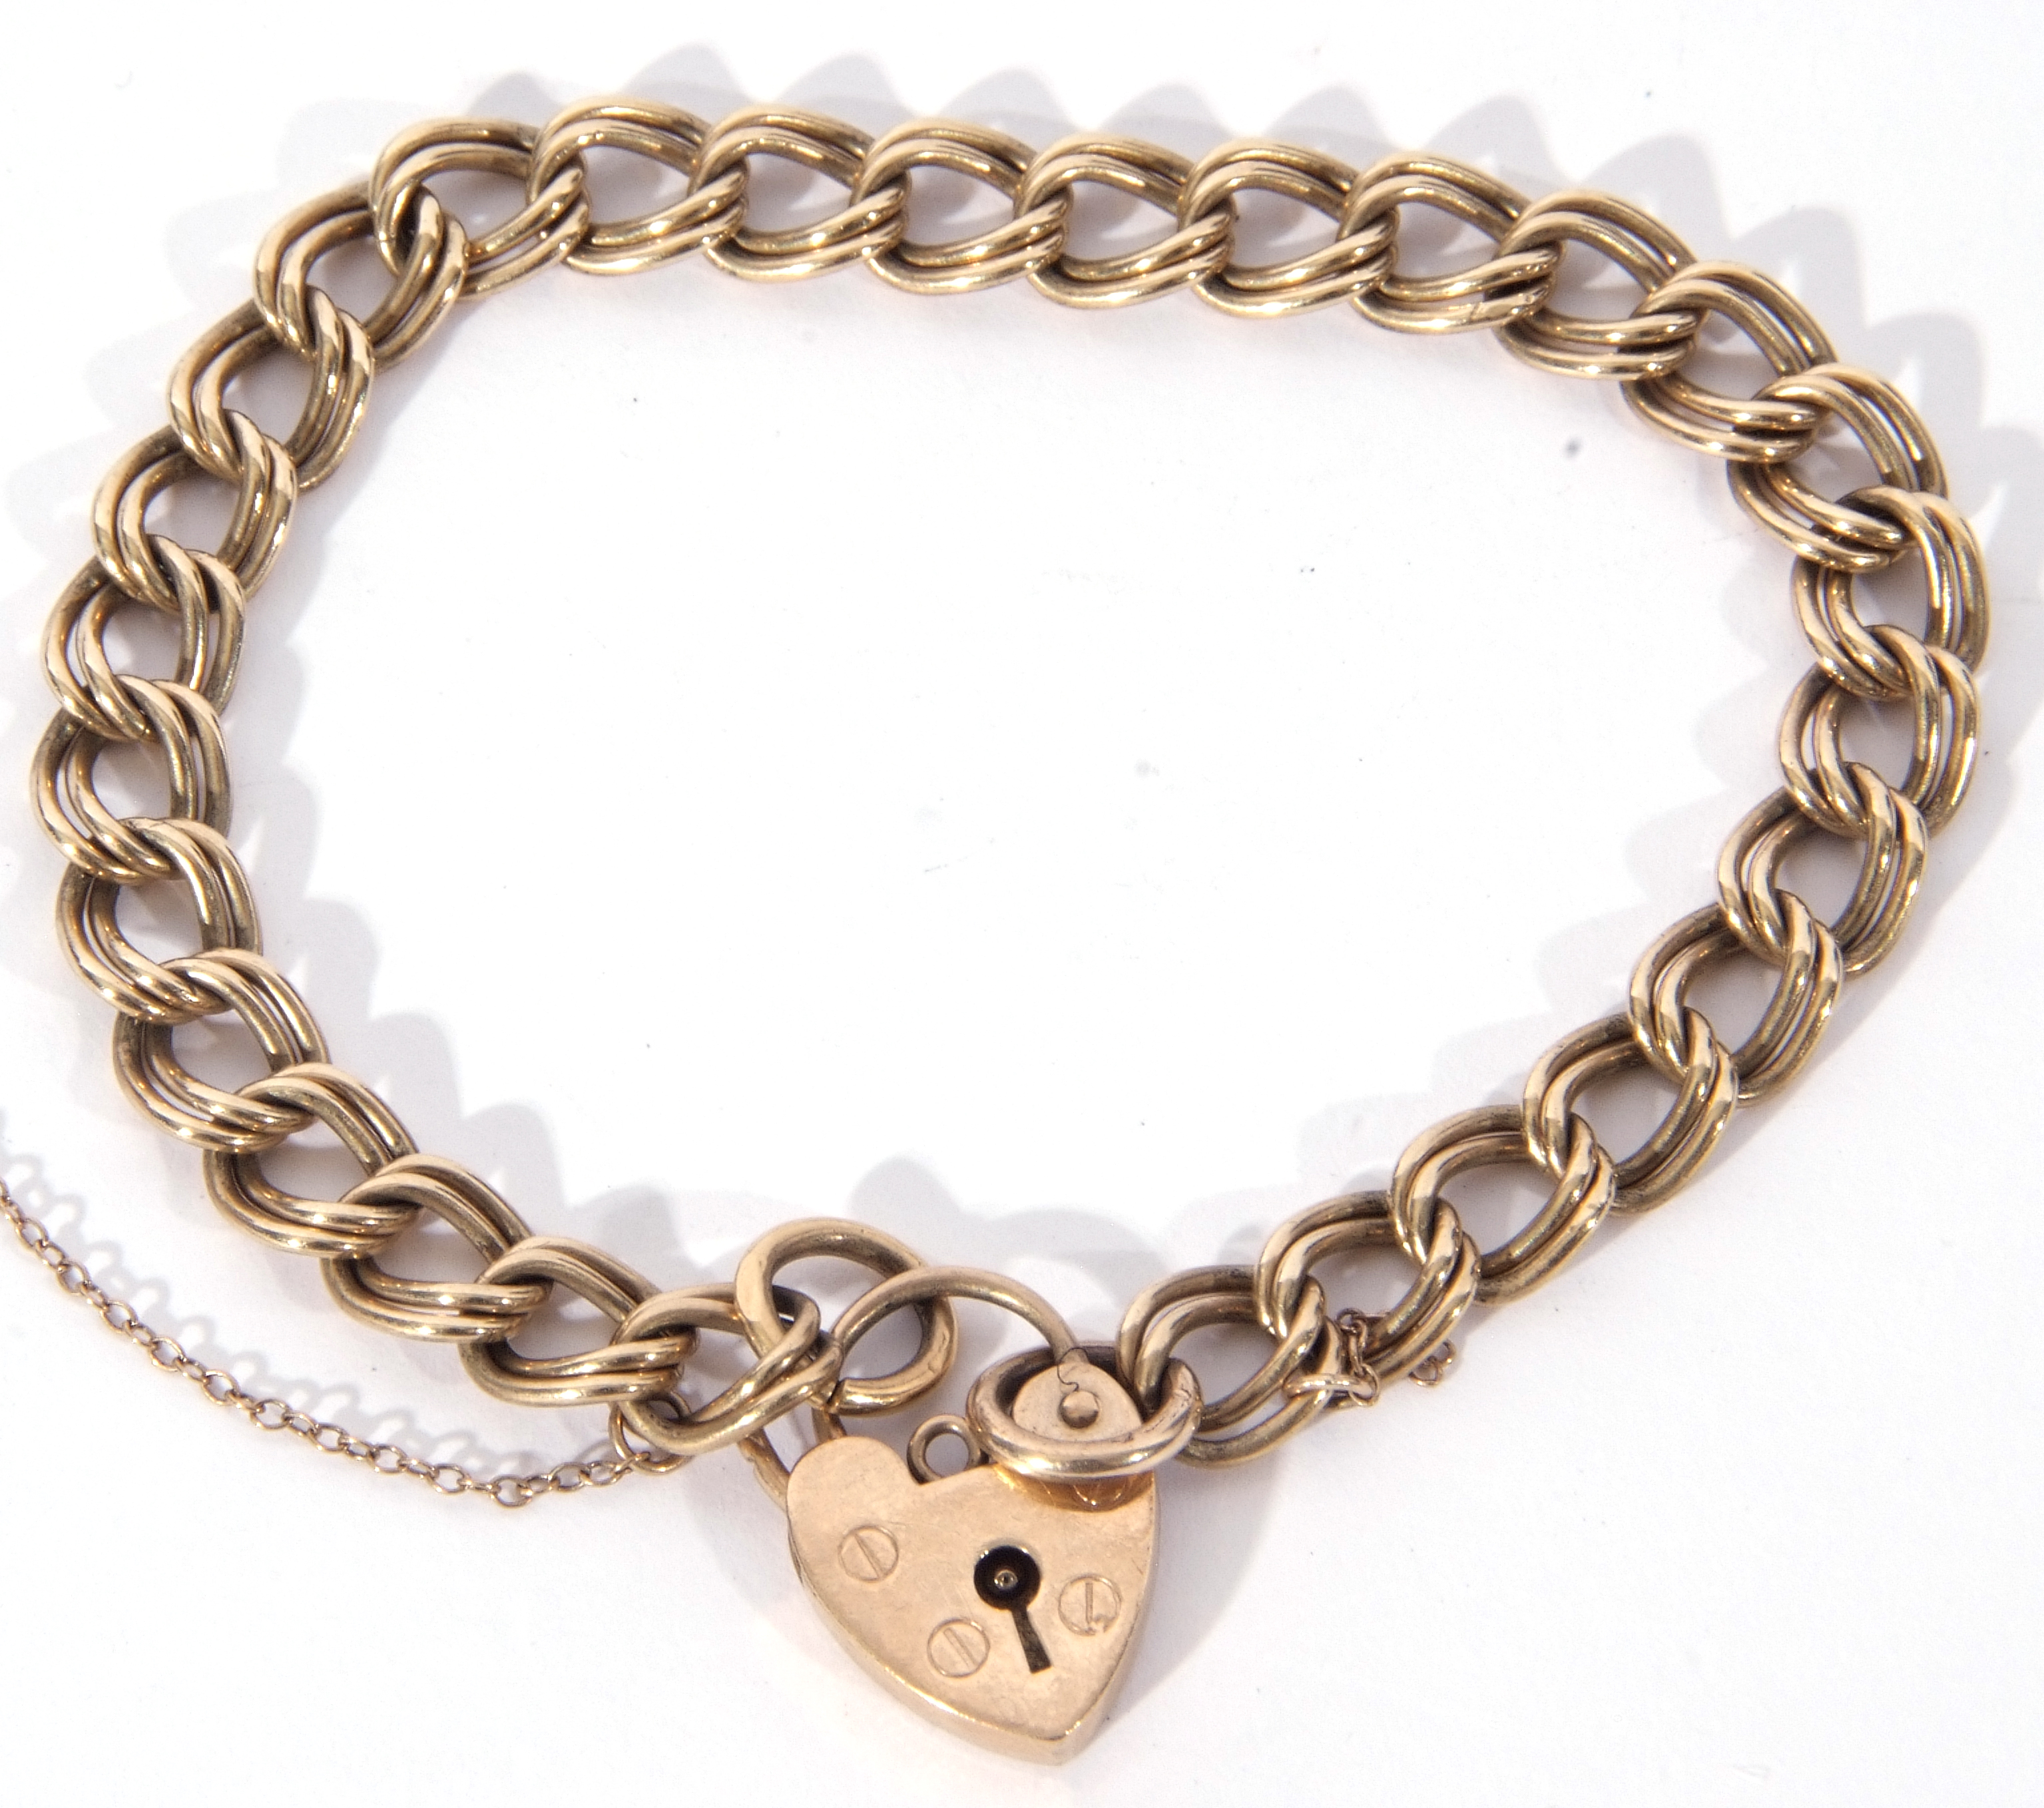 9ct gold bracelet, a design featuring double over links to a heart padlock, 19.5cm long, 12.5gms